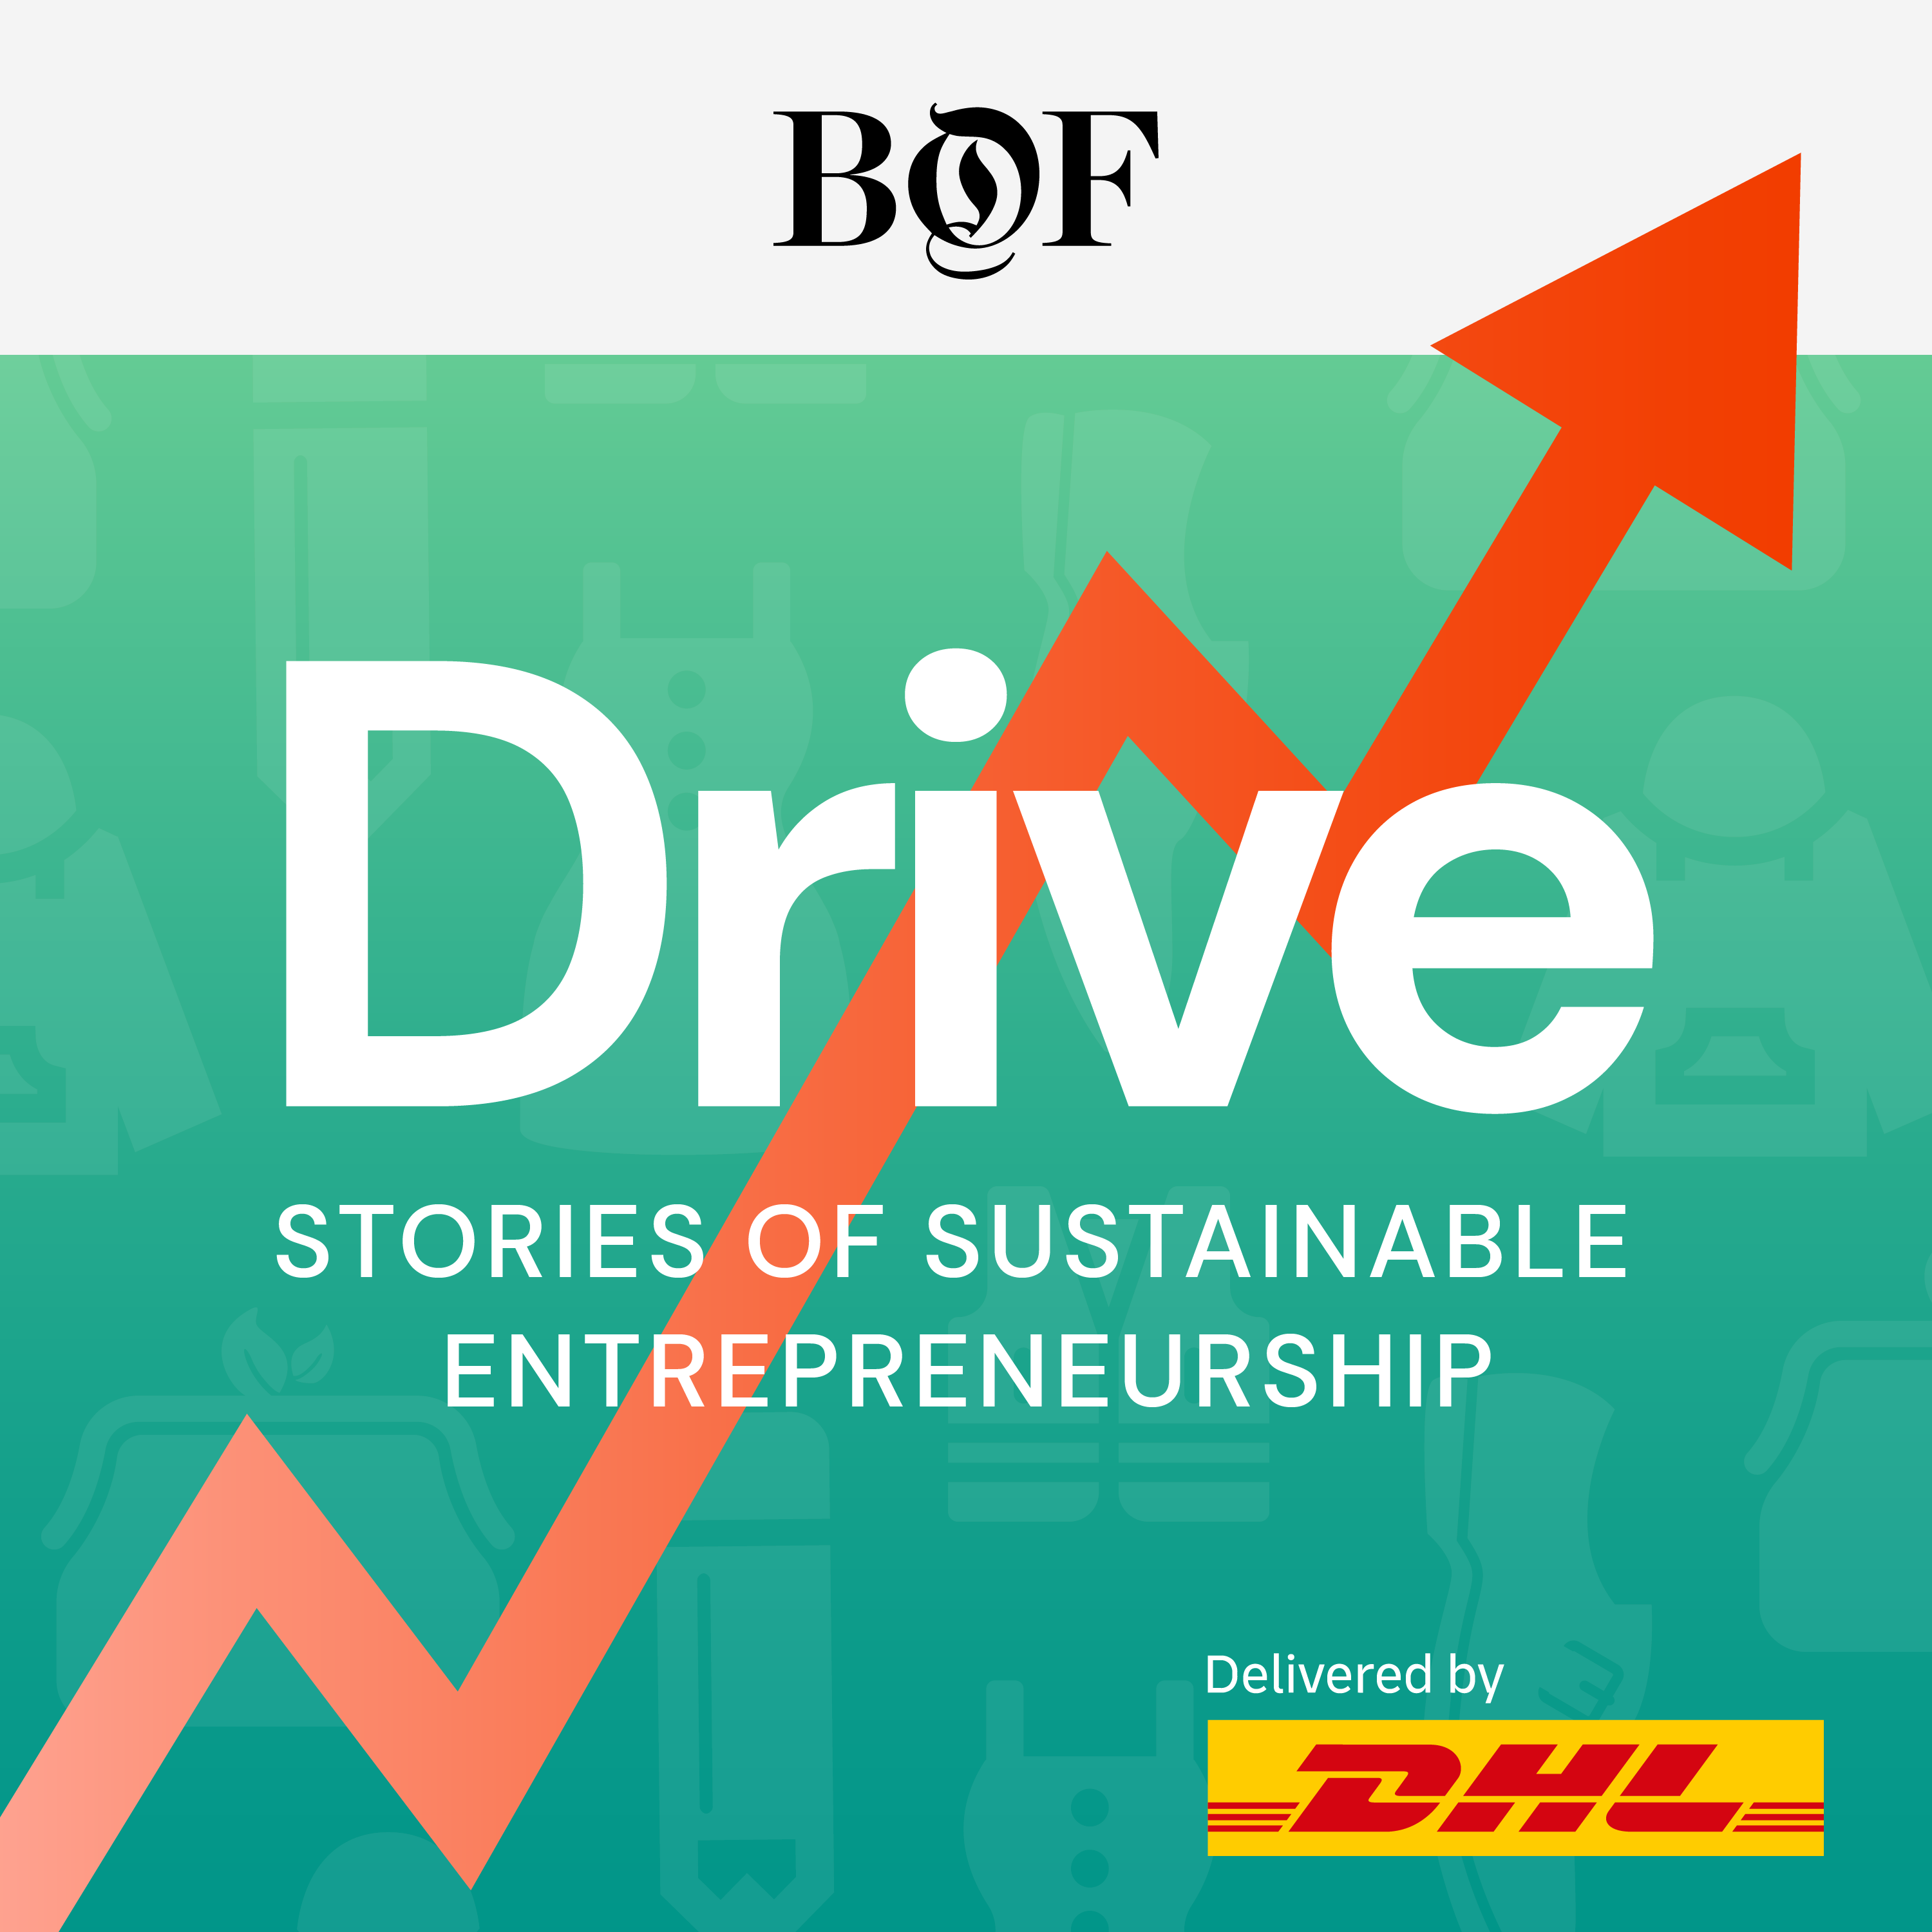 Reformation's Yael Aflalo On Finding a Sustainable Focus | Drive Season 2